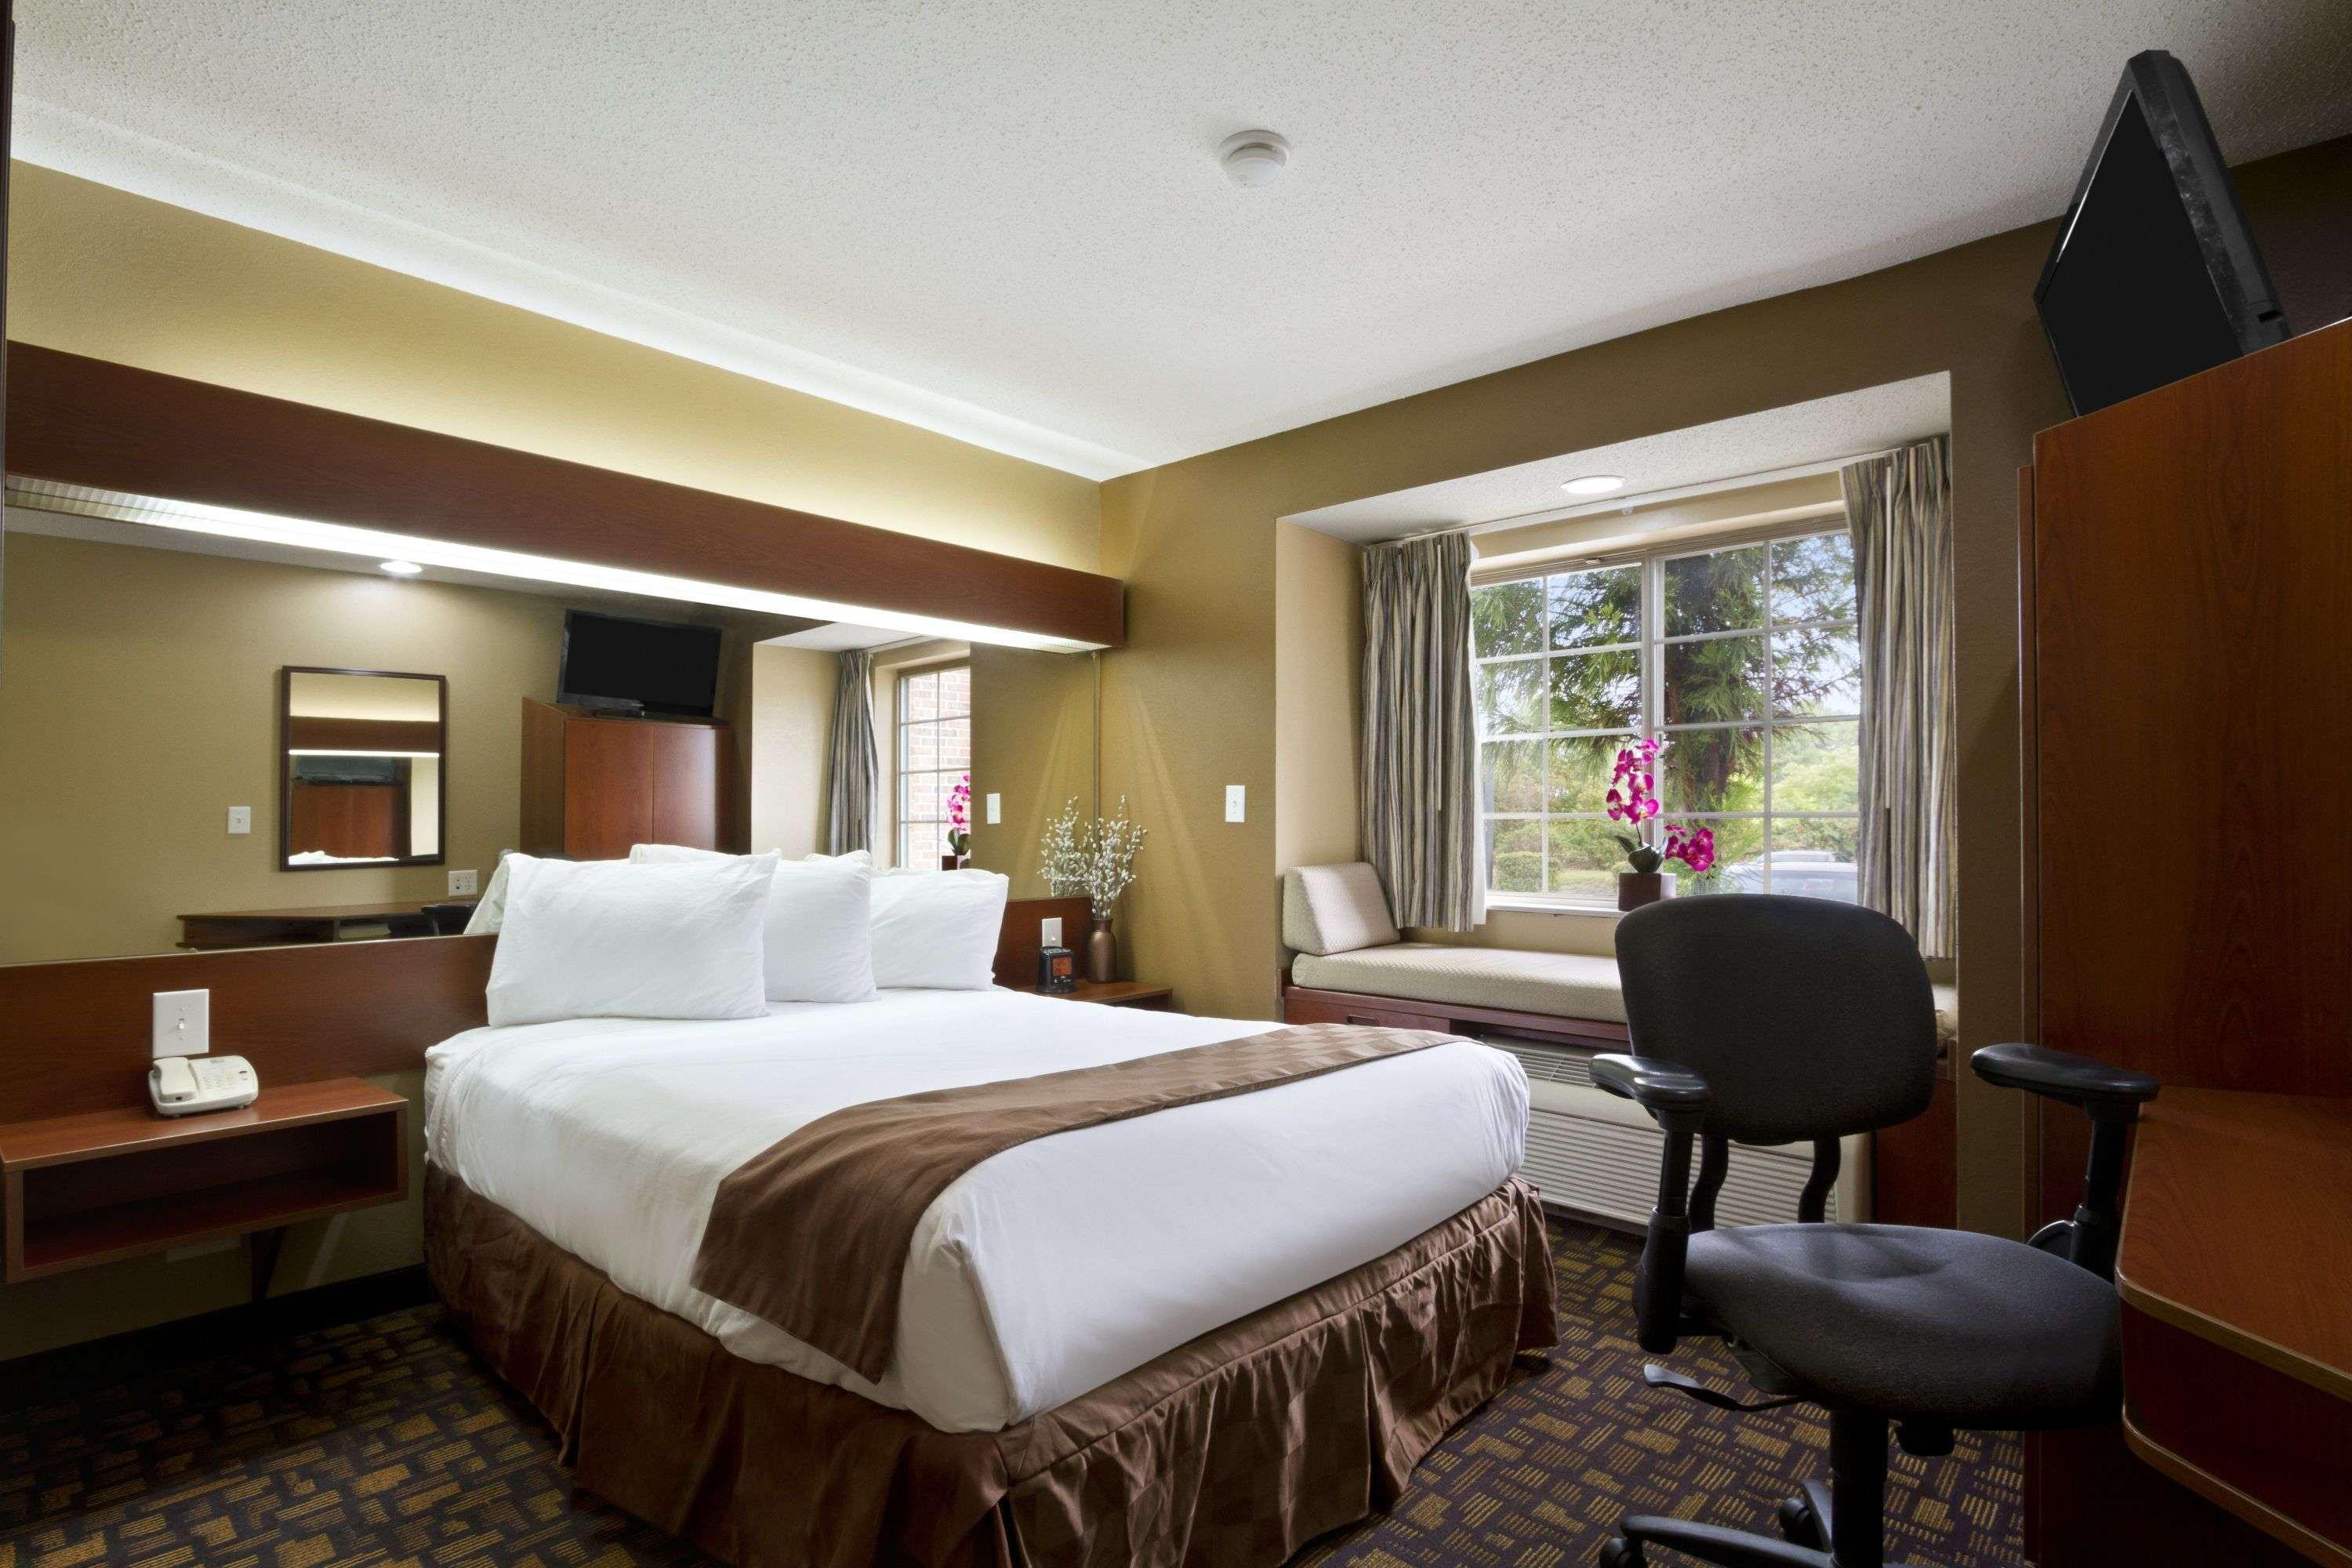 Microtel Inn & Suites by Wyndham Lithonia - Stone Mountain